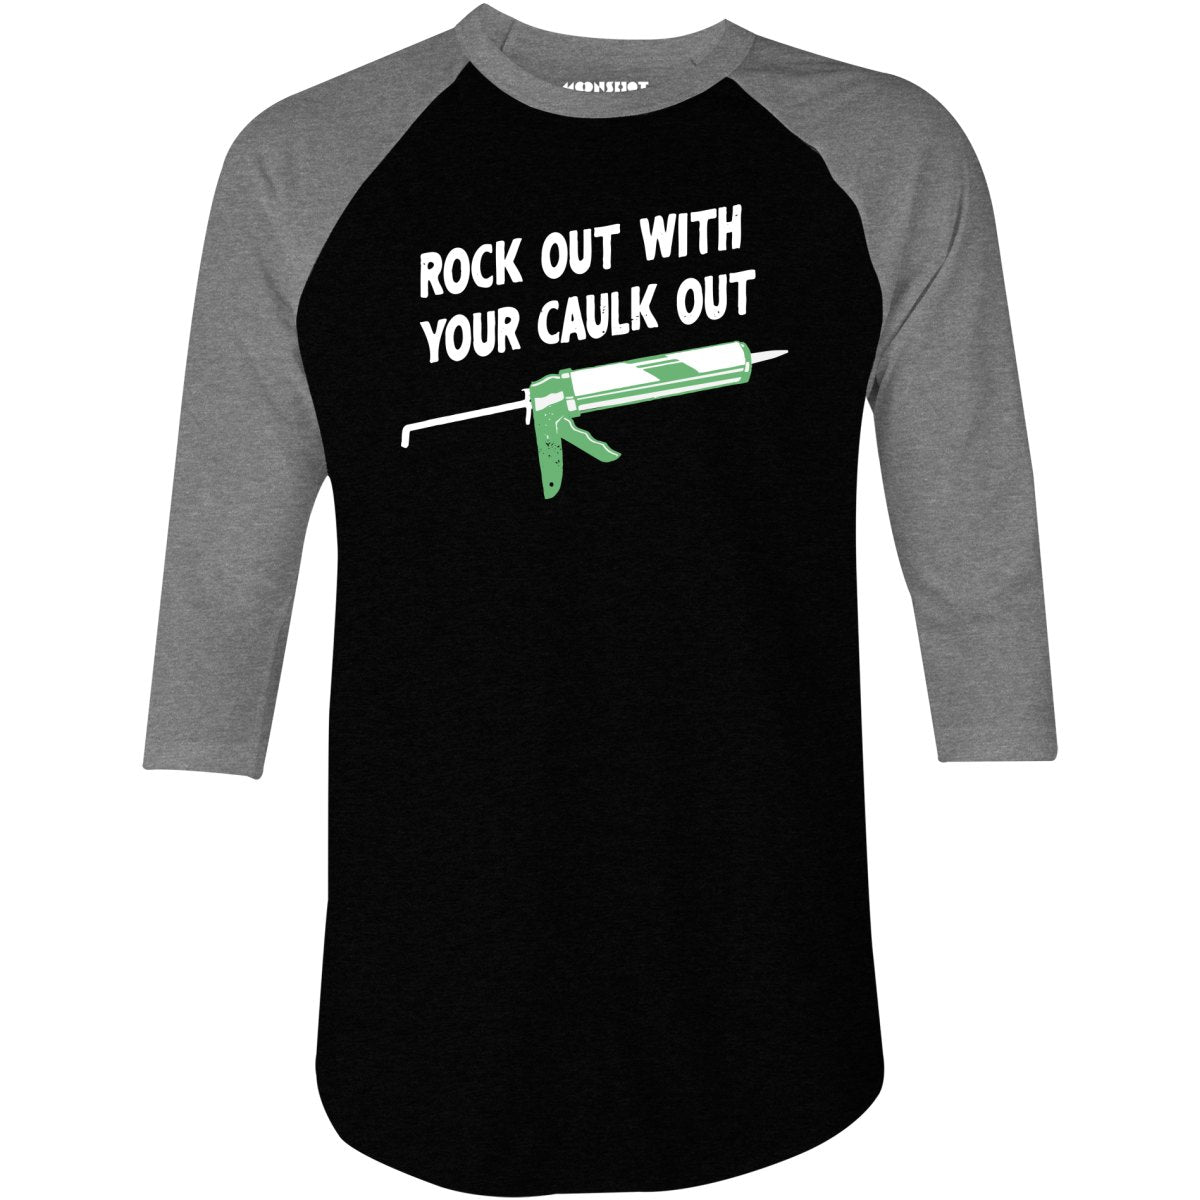 Rock Out With Your Caulk Out - 3/4 Sleeve Raglan T-Shirt